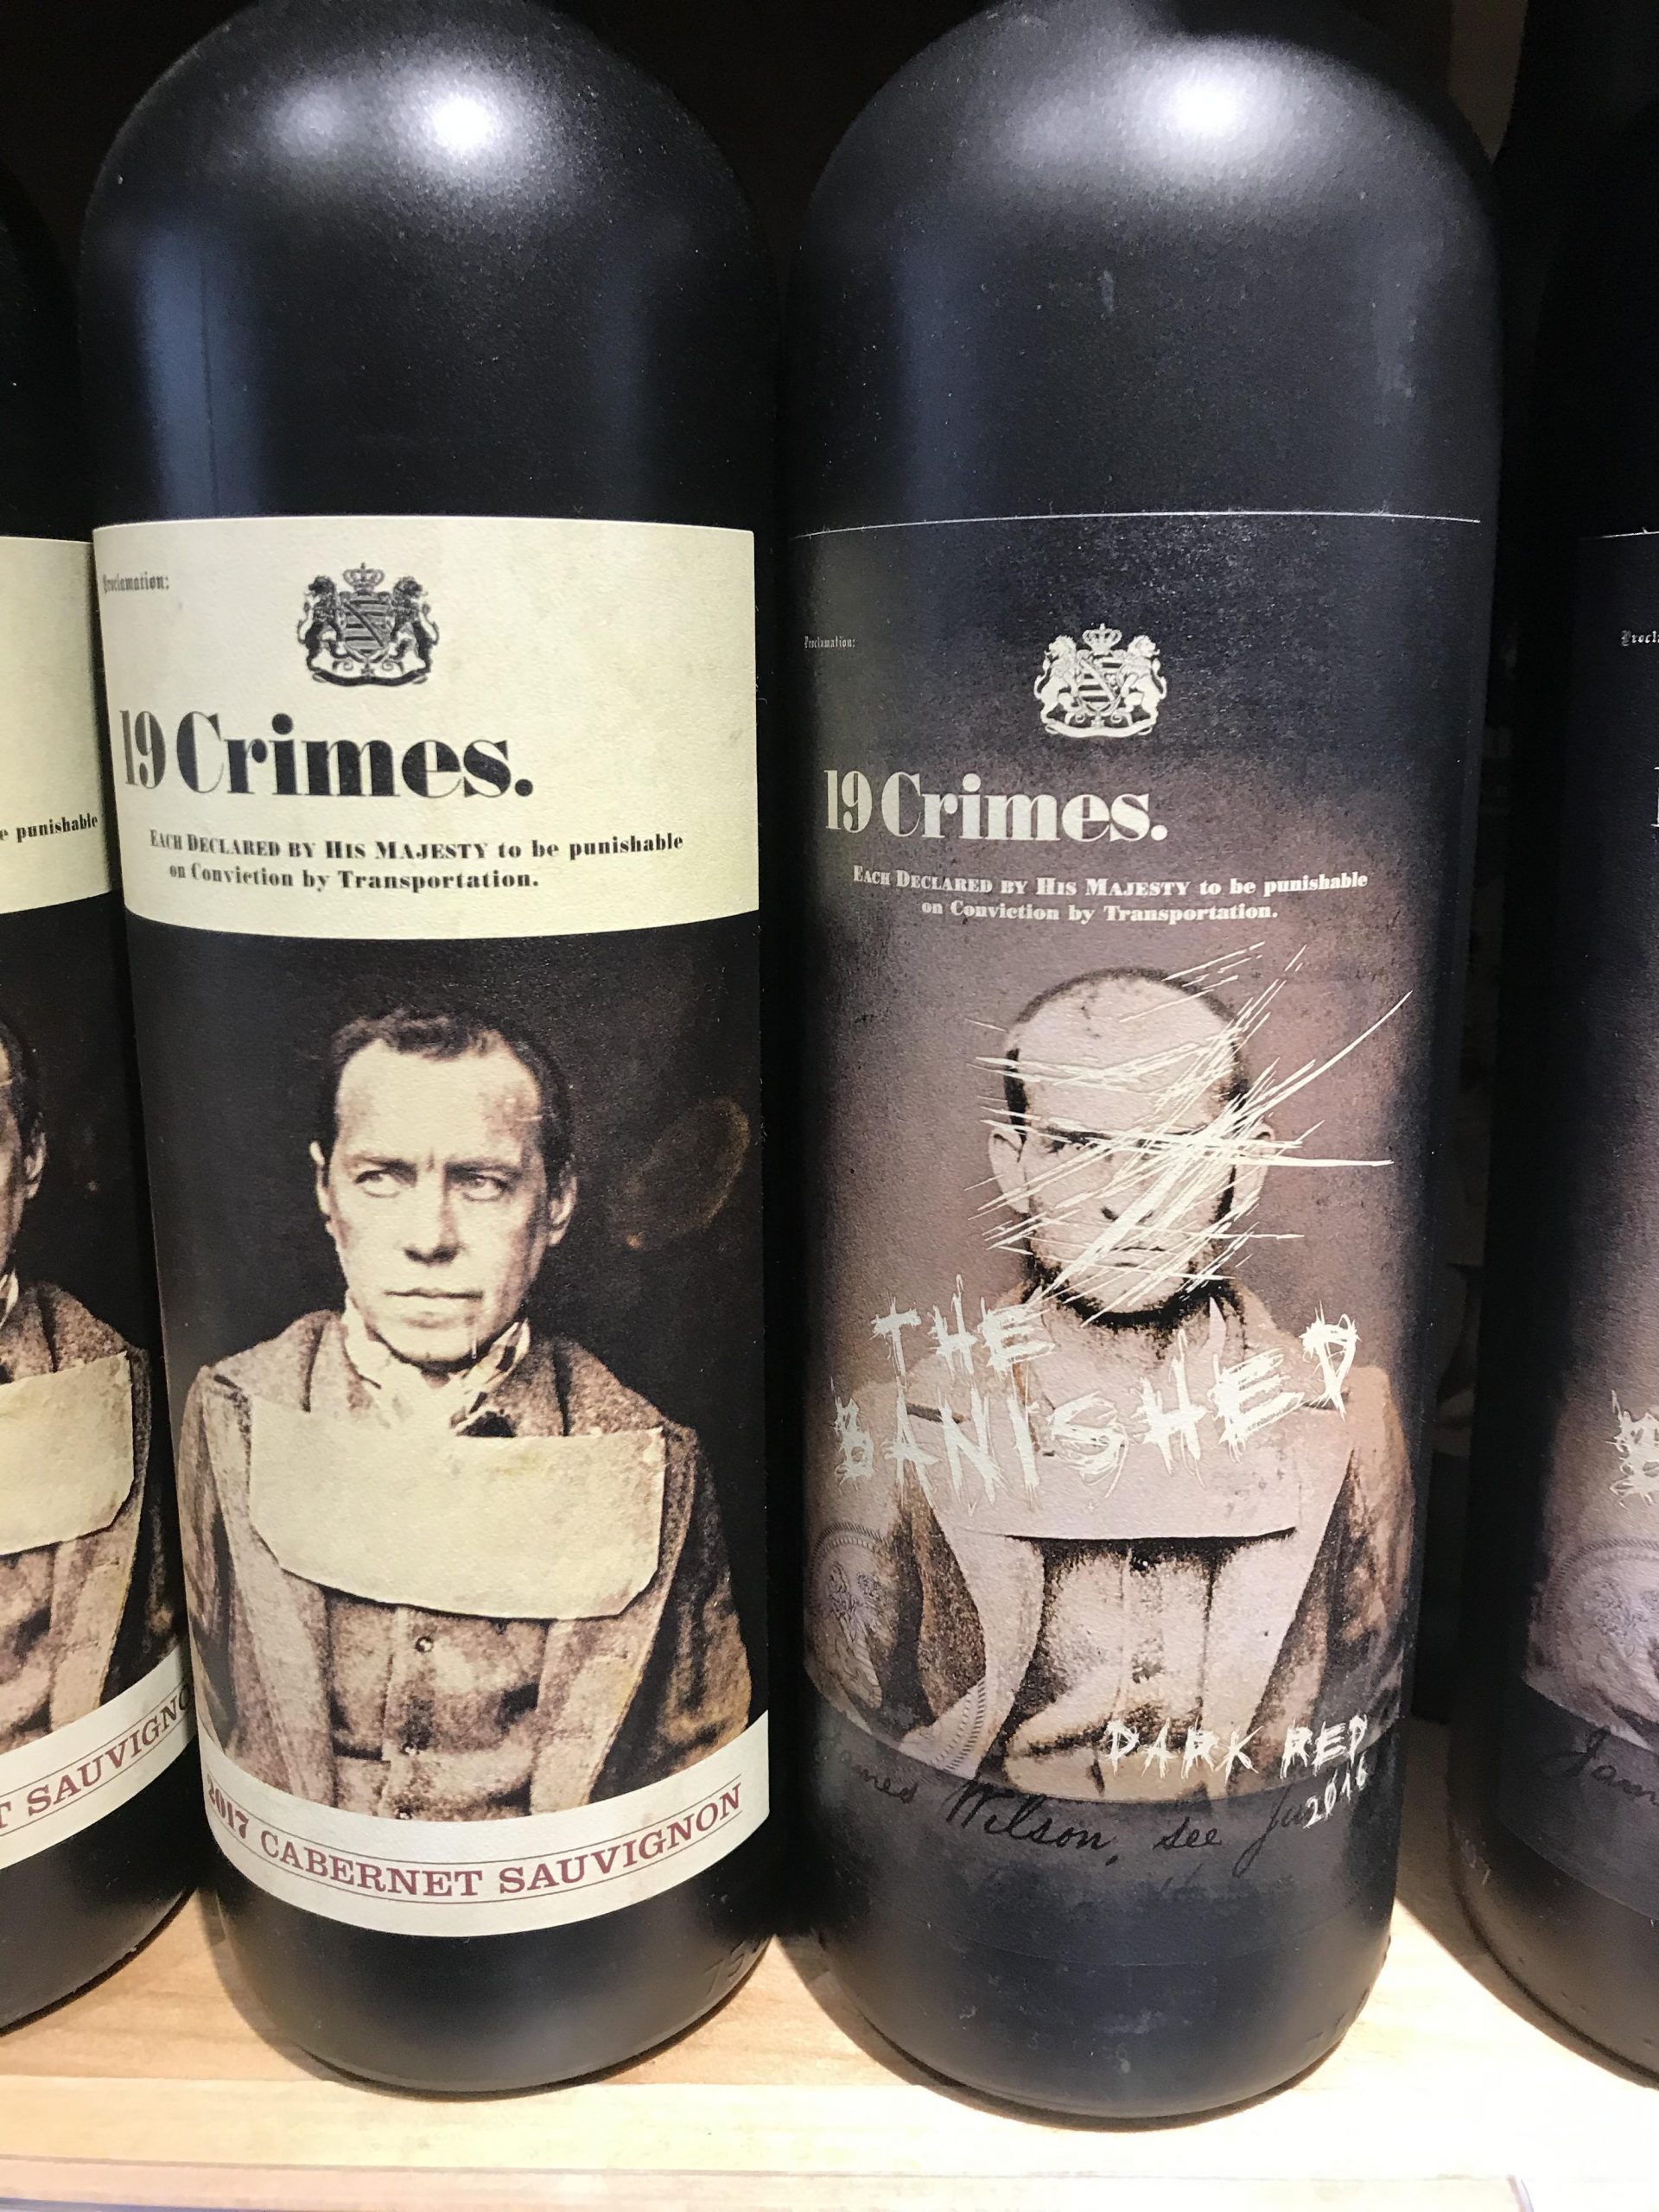 Found the perfect wine to pair with true crime ...